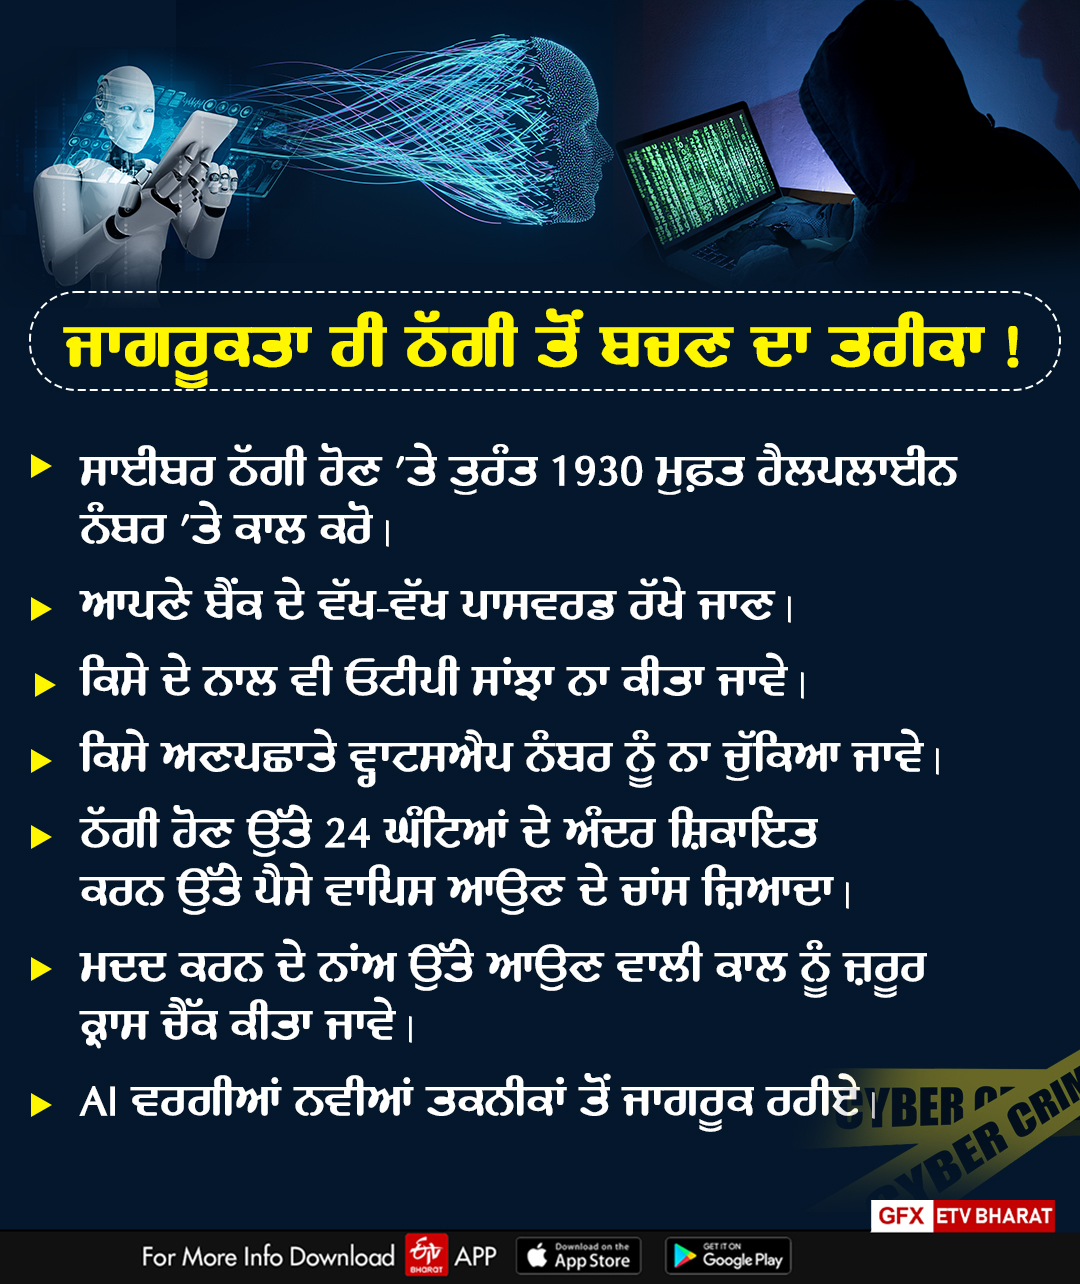 Cyber Crime With AI and on ChatGPT, Cyber Crime, Ludhiana